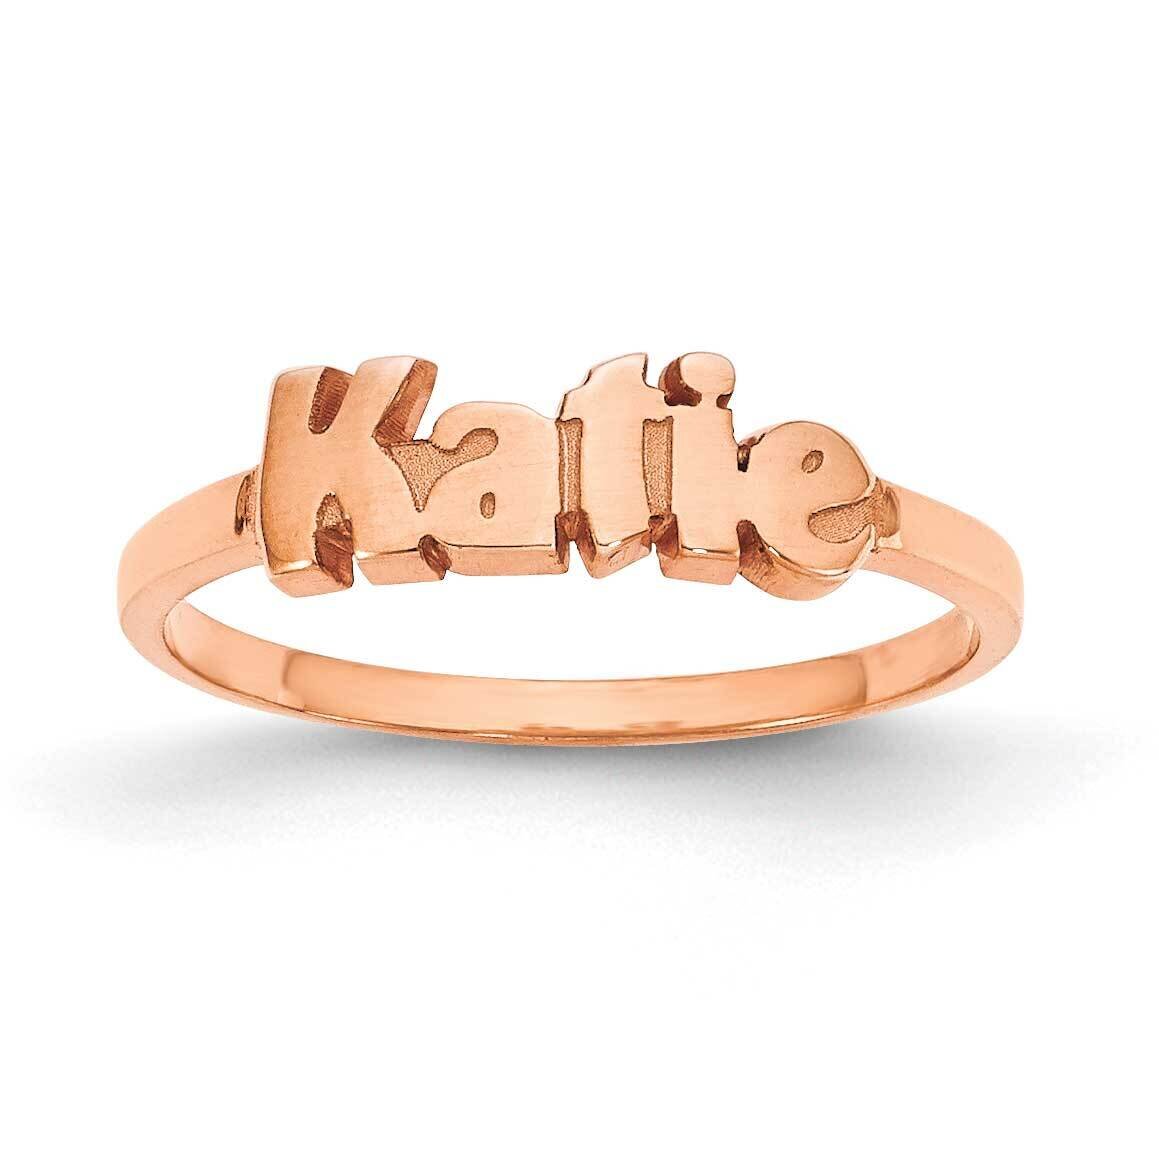 Personalized Name Ring 14k Rose Gold Polished XNR73R